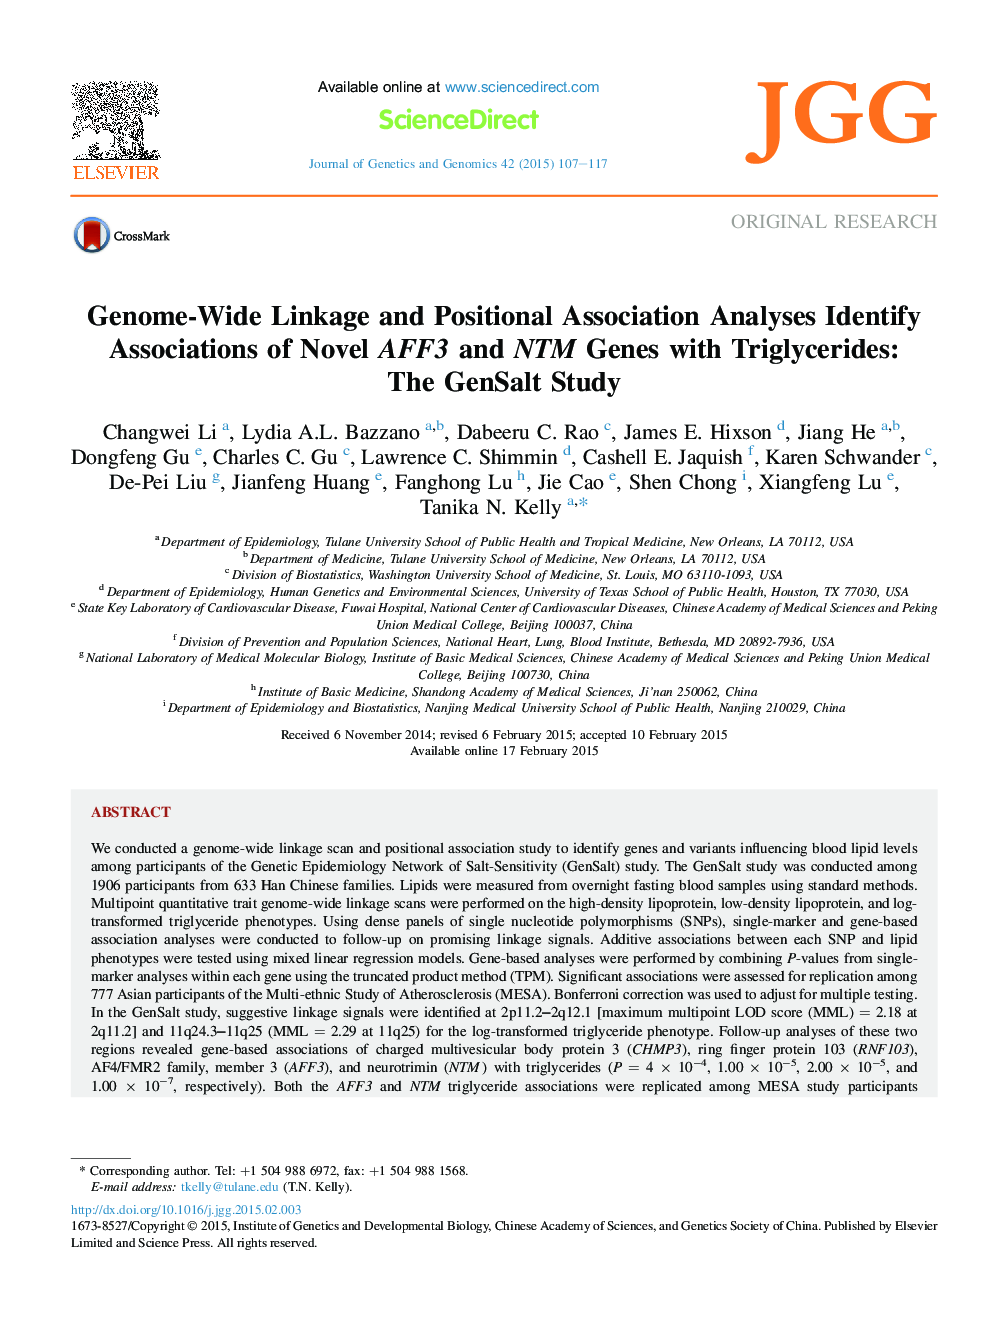 Genome-Wide Linkage and Positional Association Analyses Identify Associations of Novel AFF3 and NTM Genes with Triglycerides: The GenSalt Study